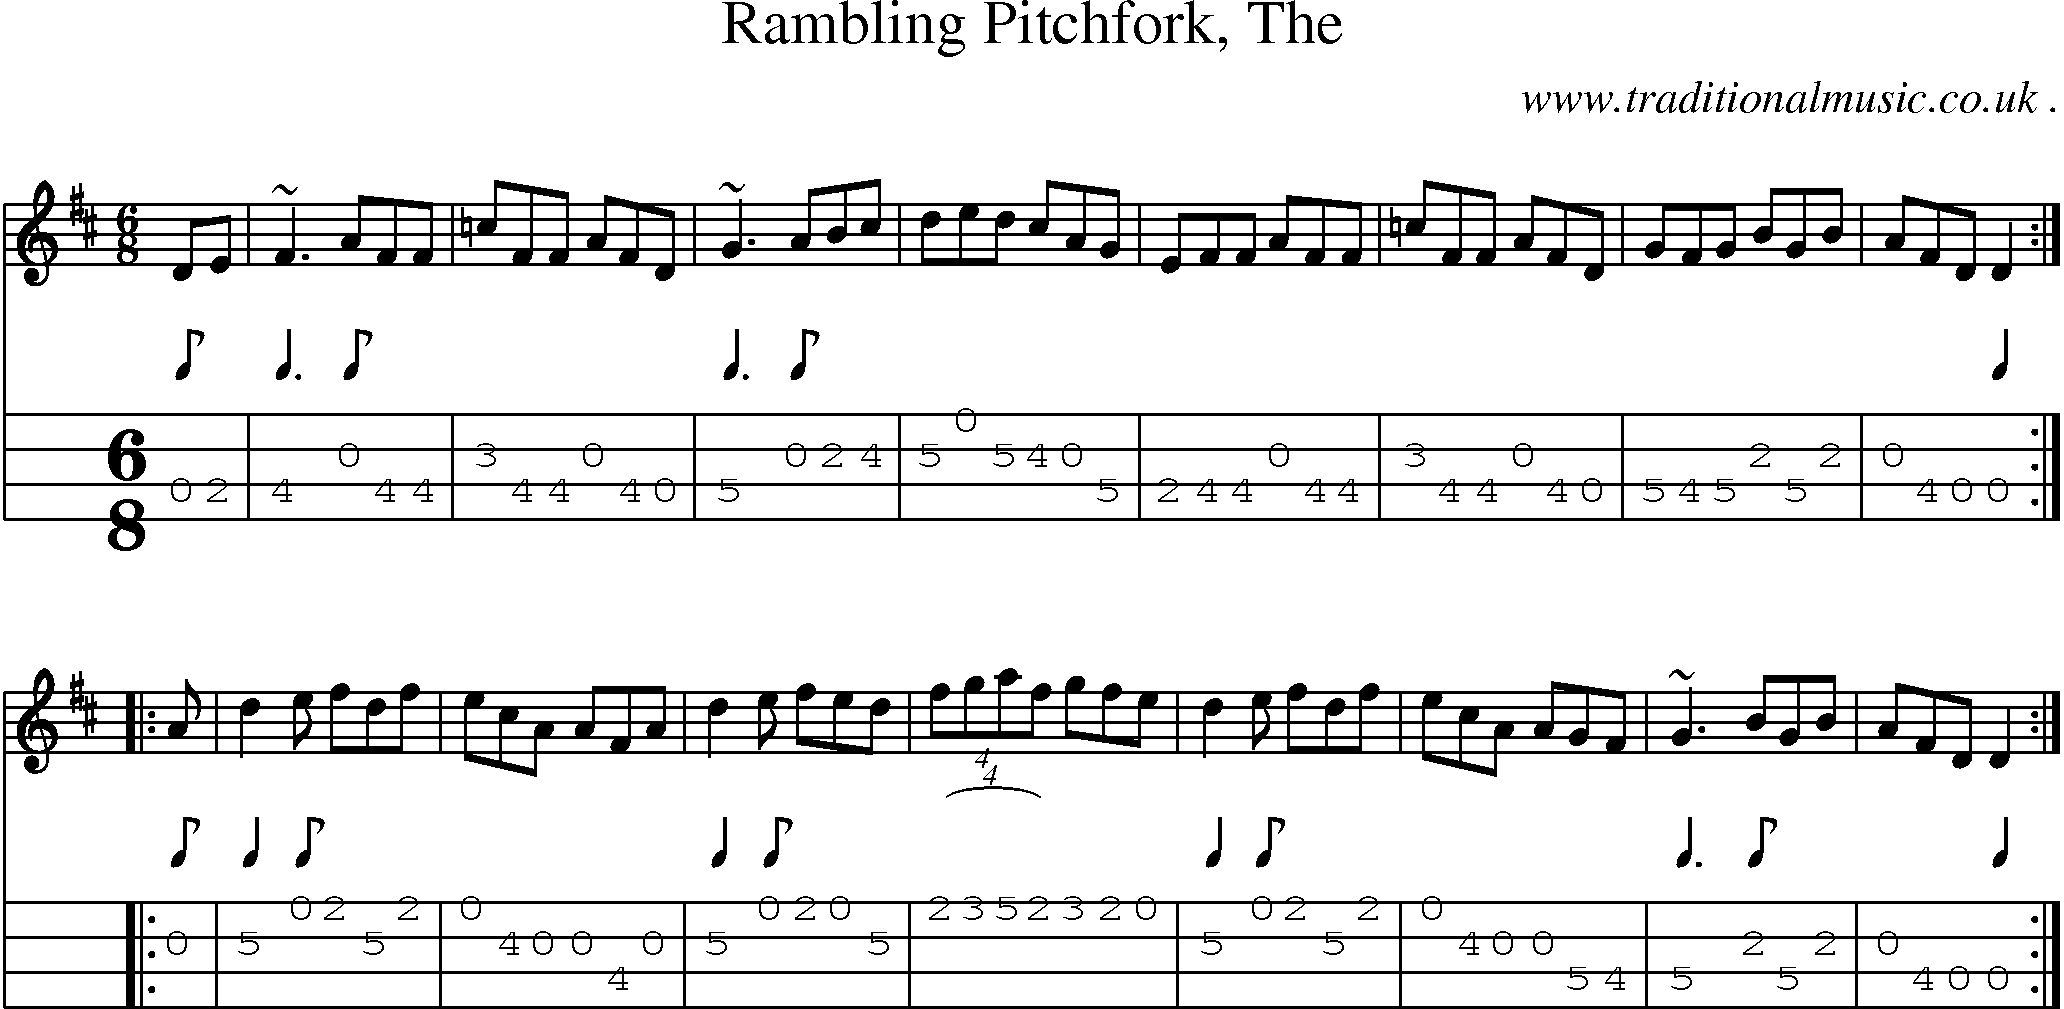 Sheet-music  score, Chords and Mandolin Tabs for Rambling Pitchfork The